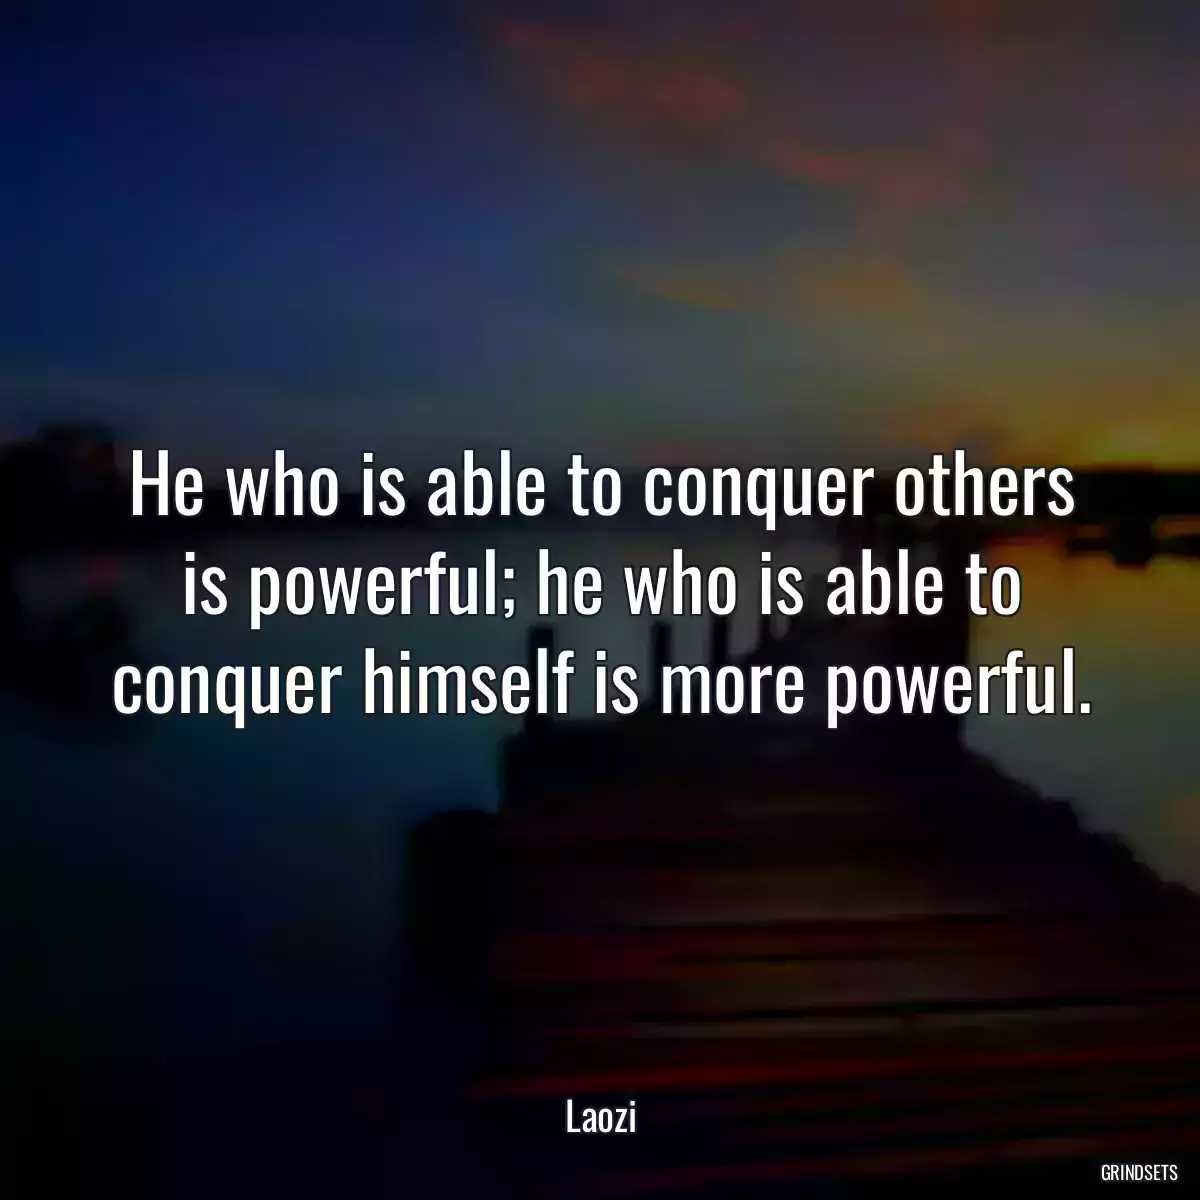 He who is able to conquer others is powerful; he who is able to conquer himself is more powerful.